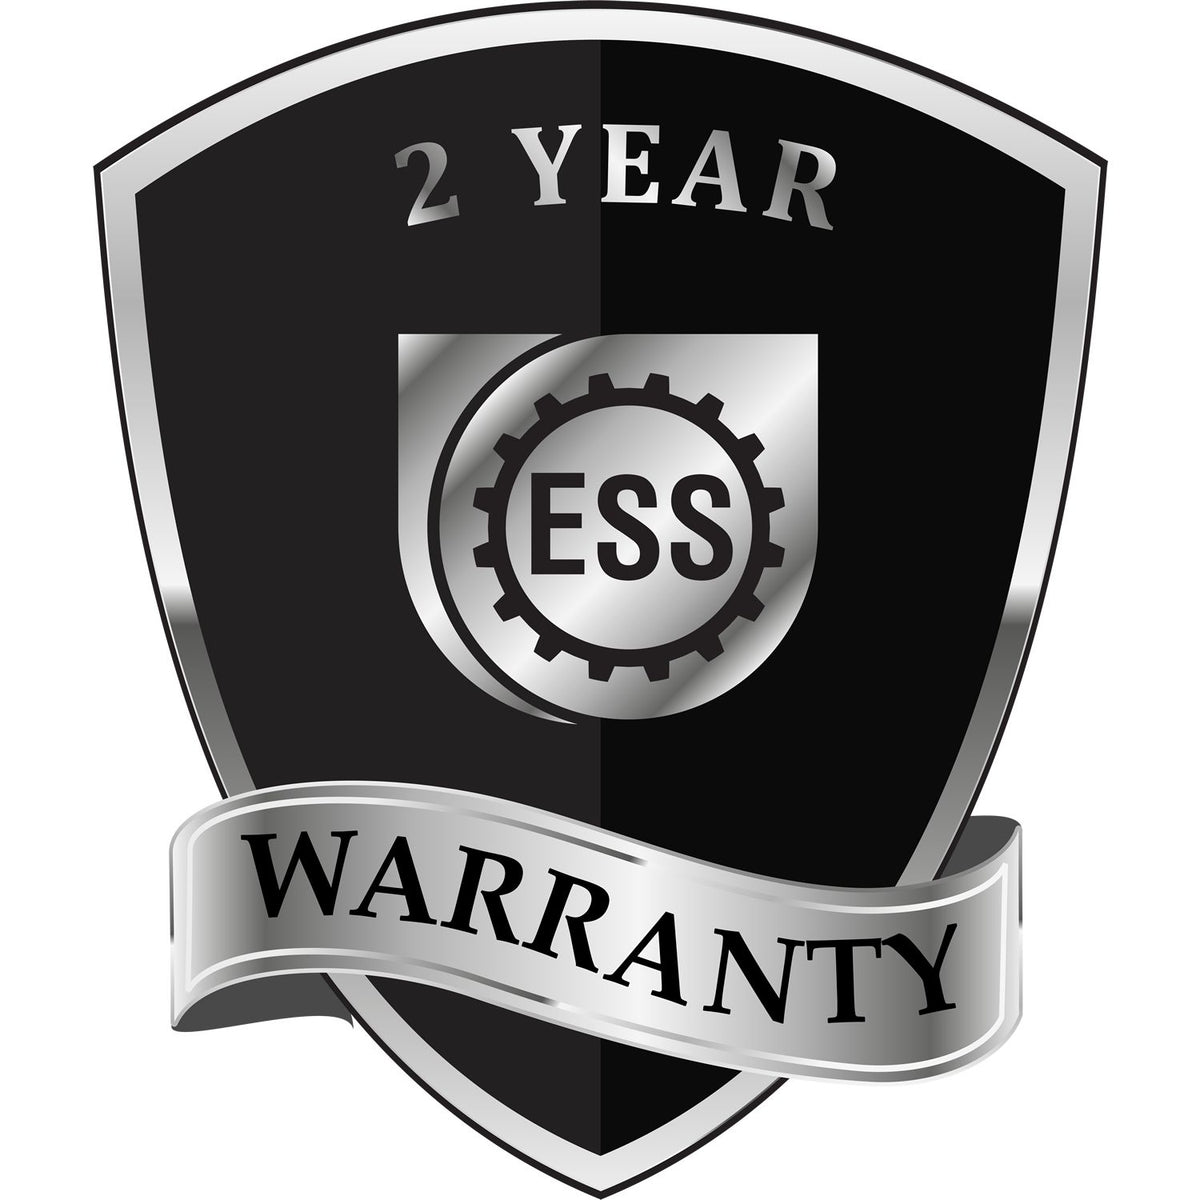 A black and silver badge or emblem showing warranty information for the Gift Colorado Land Surveyor Seal